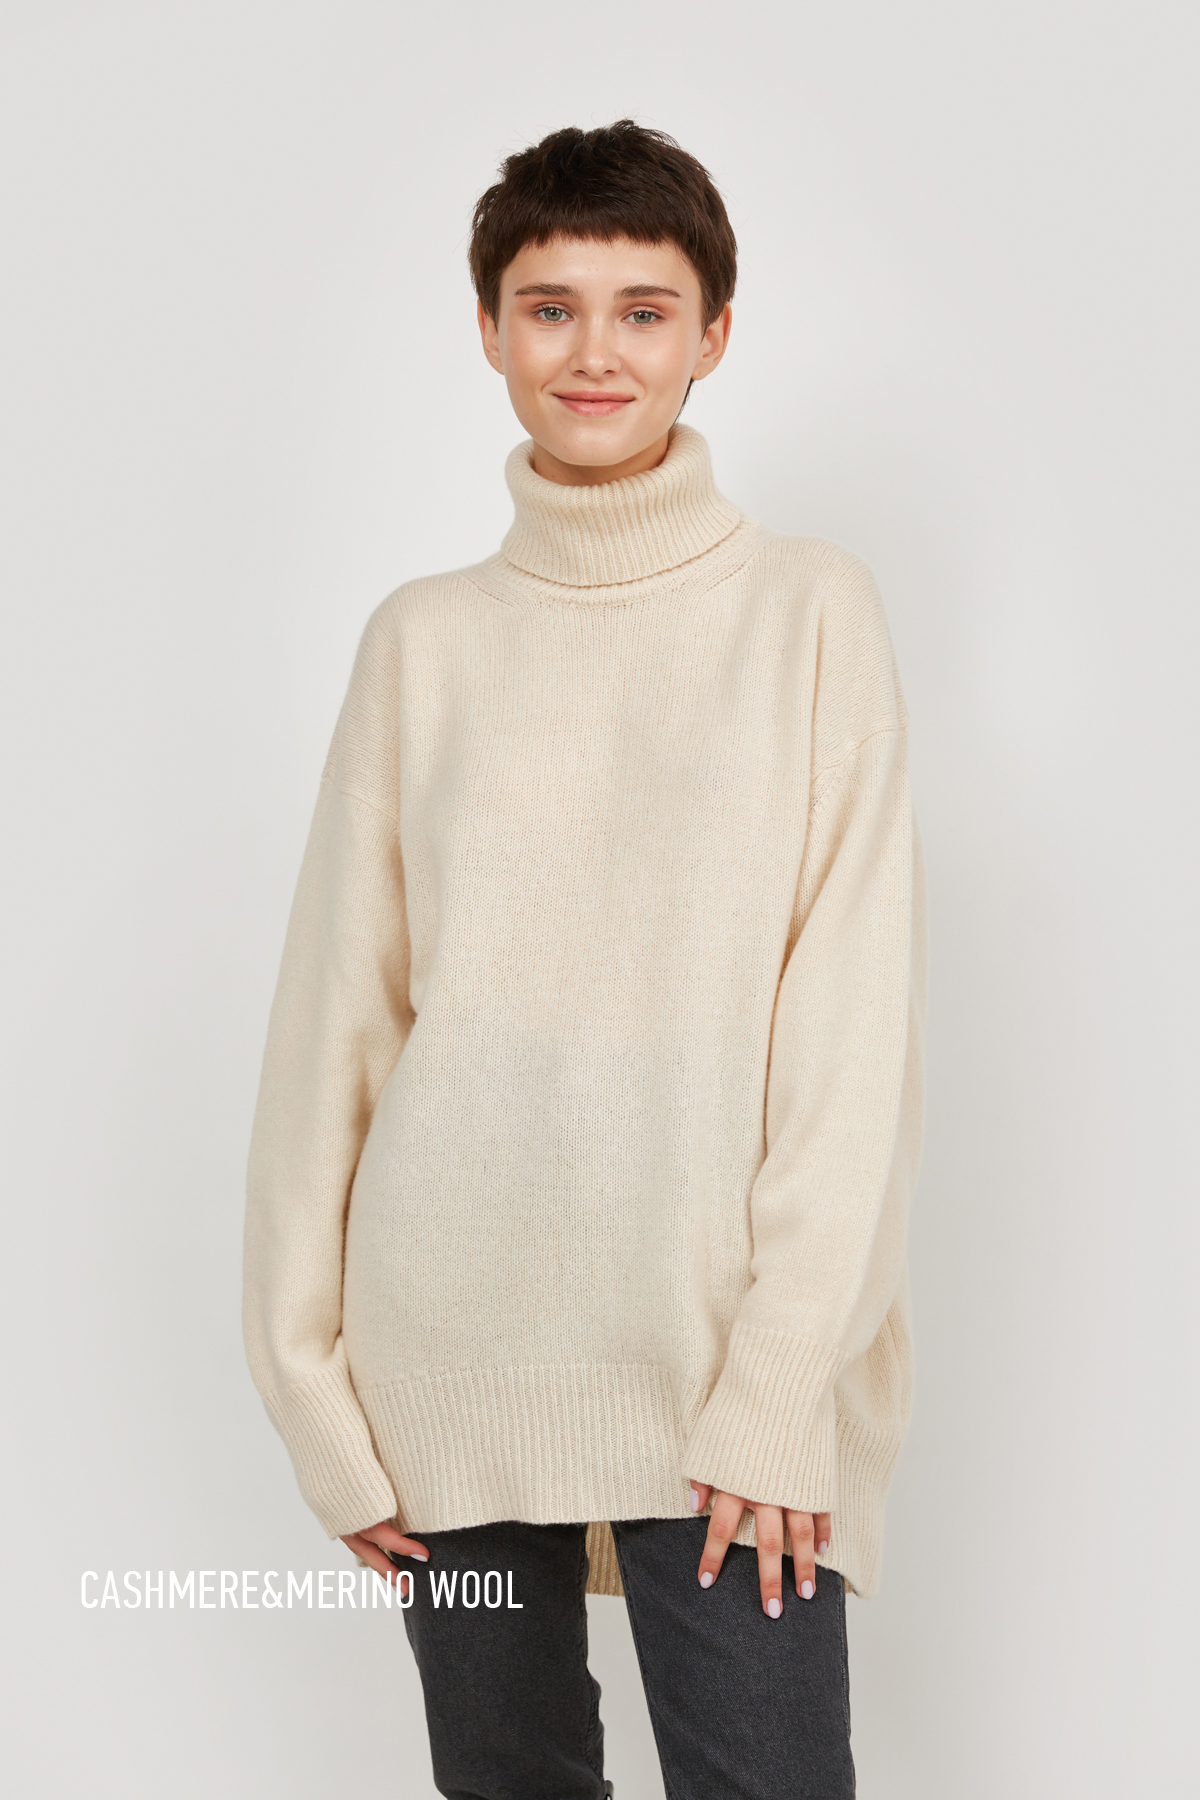 Cashmere milk knitted oversized sweater, photo 8